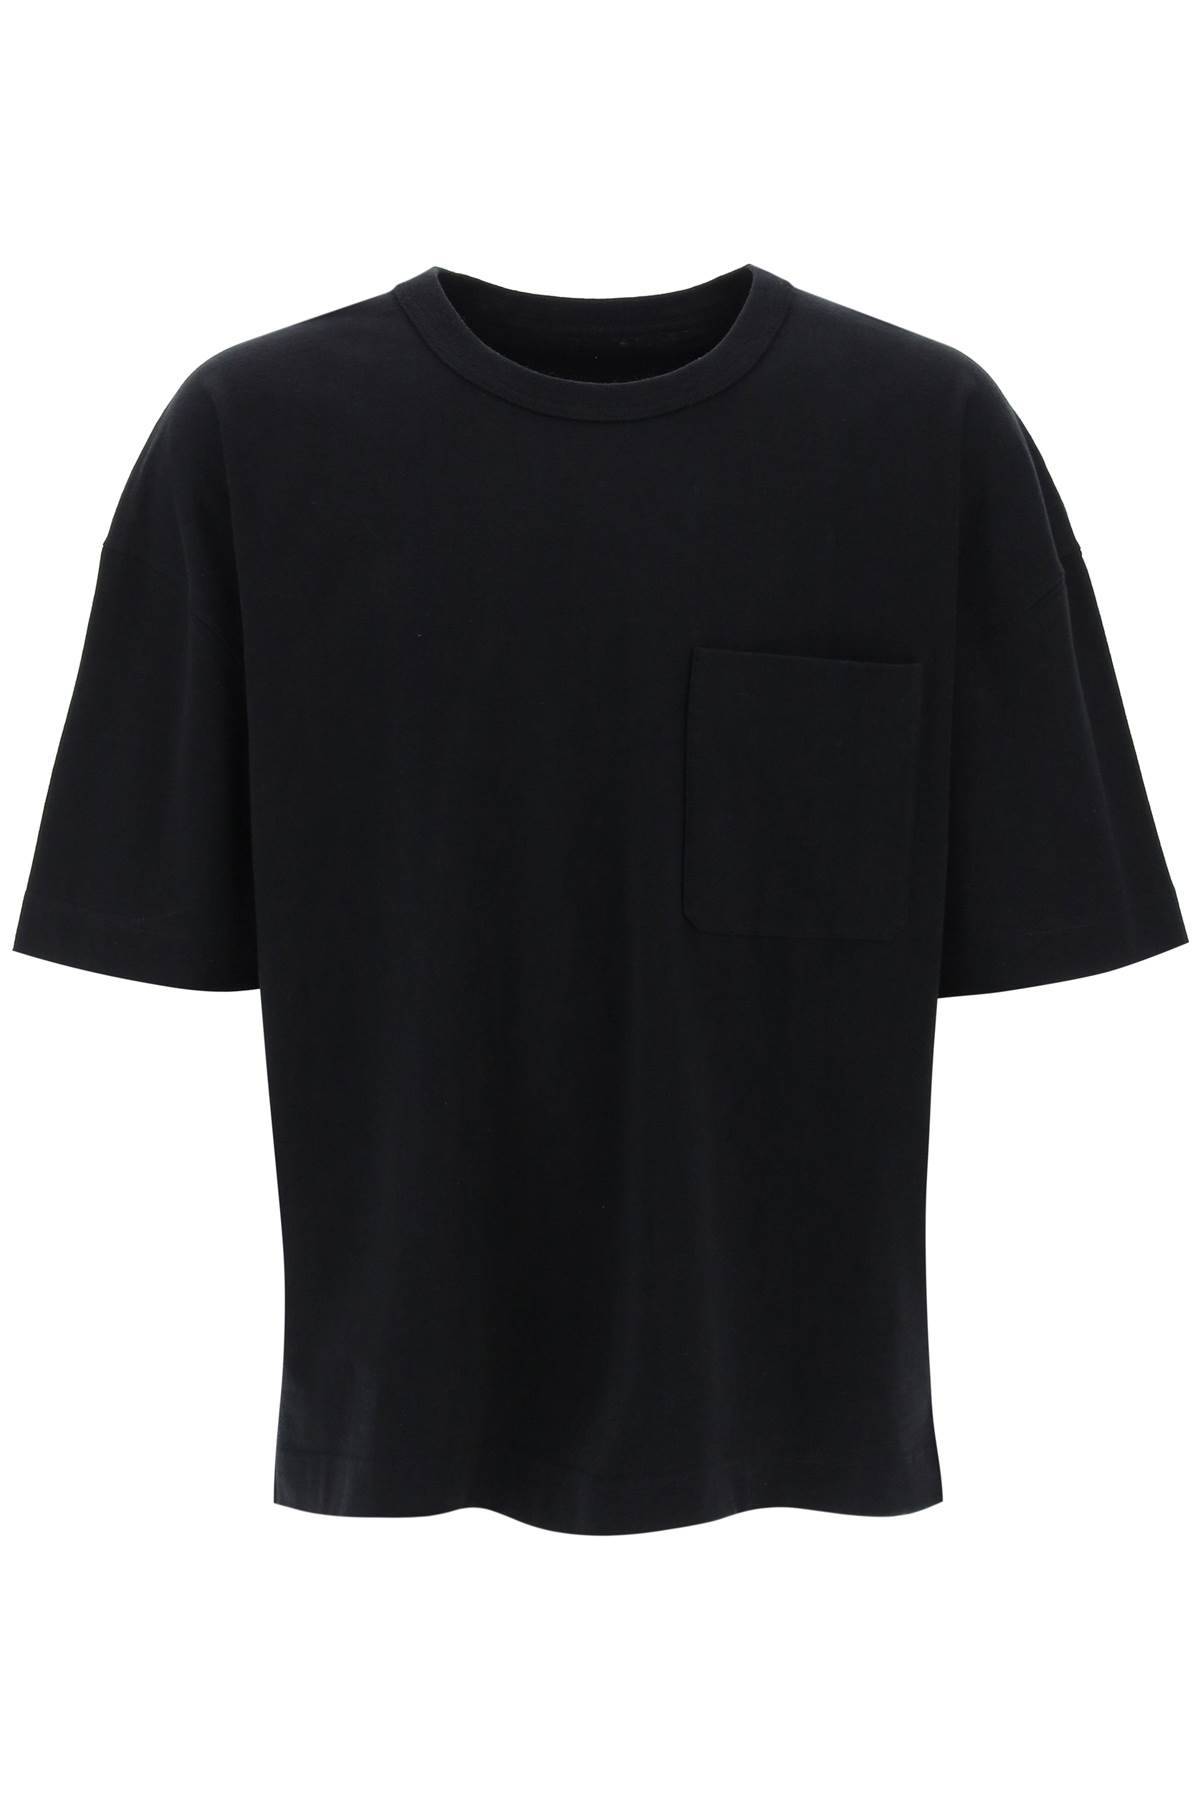 Lemaire LEMAIRE boxy t-shirt